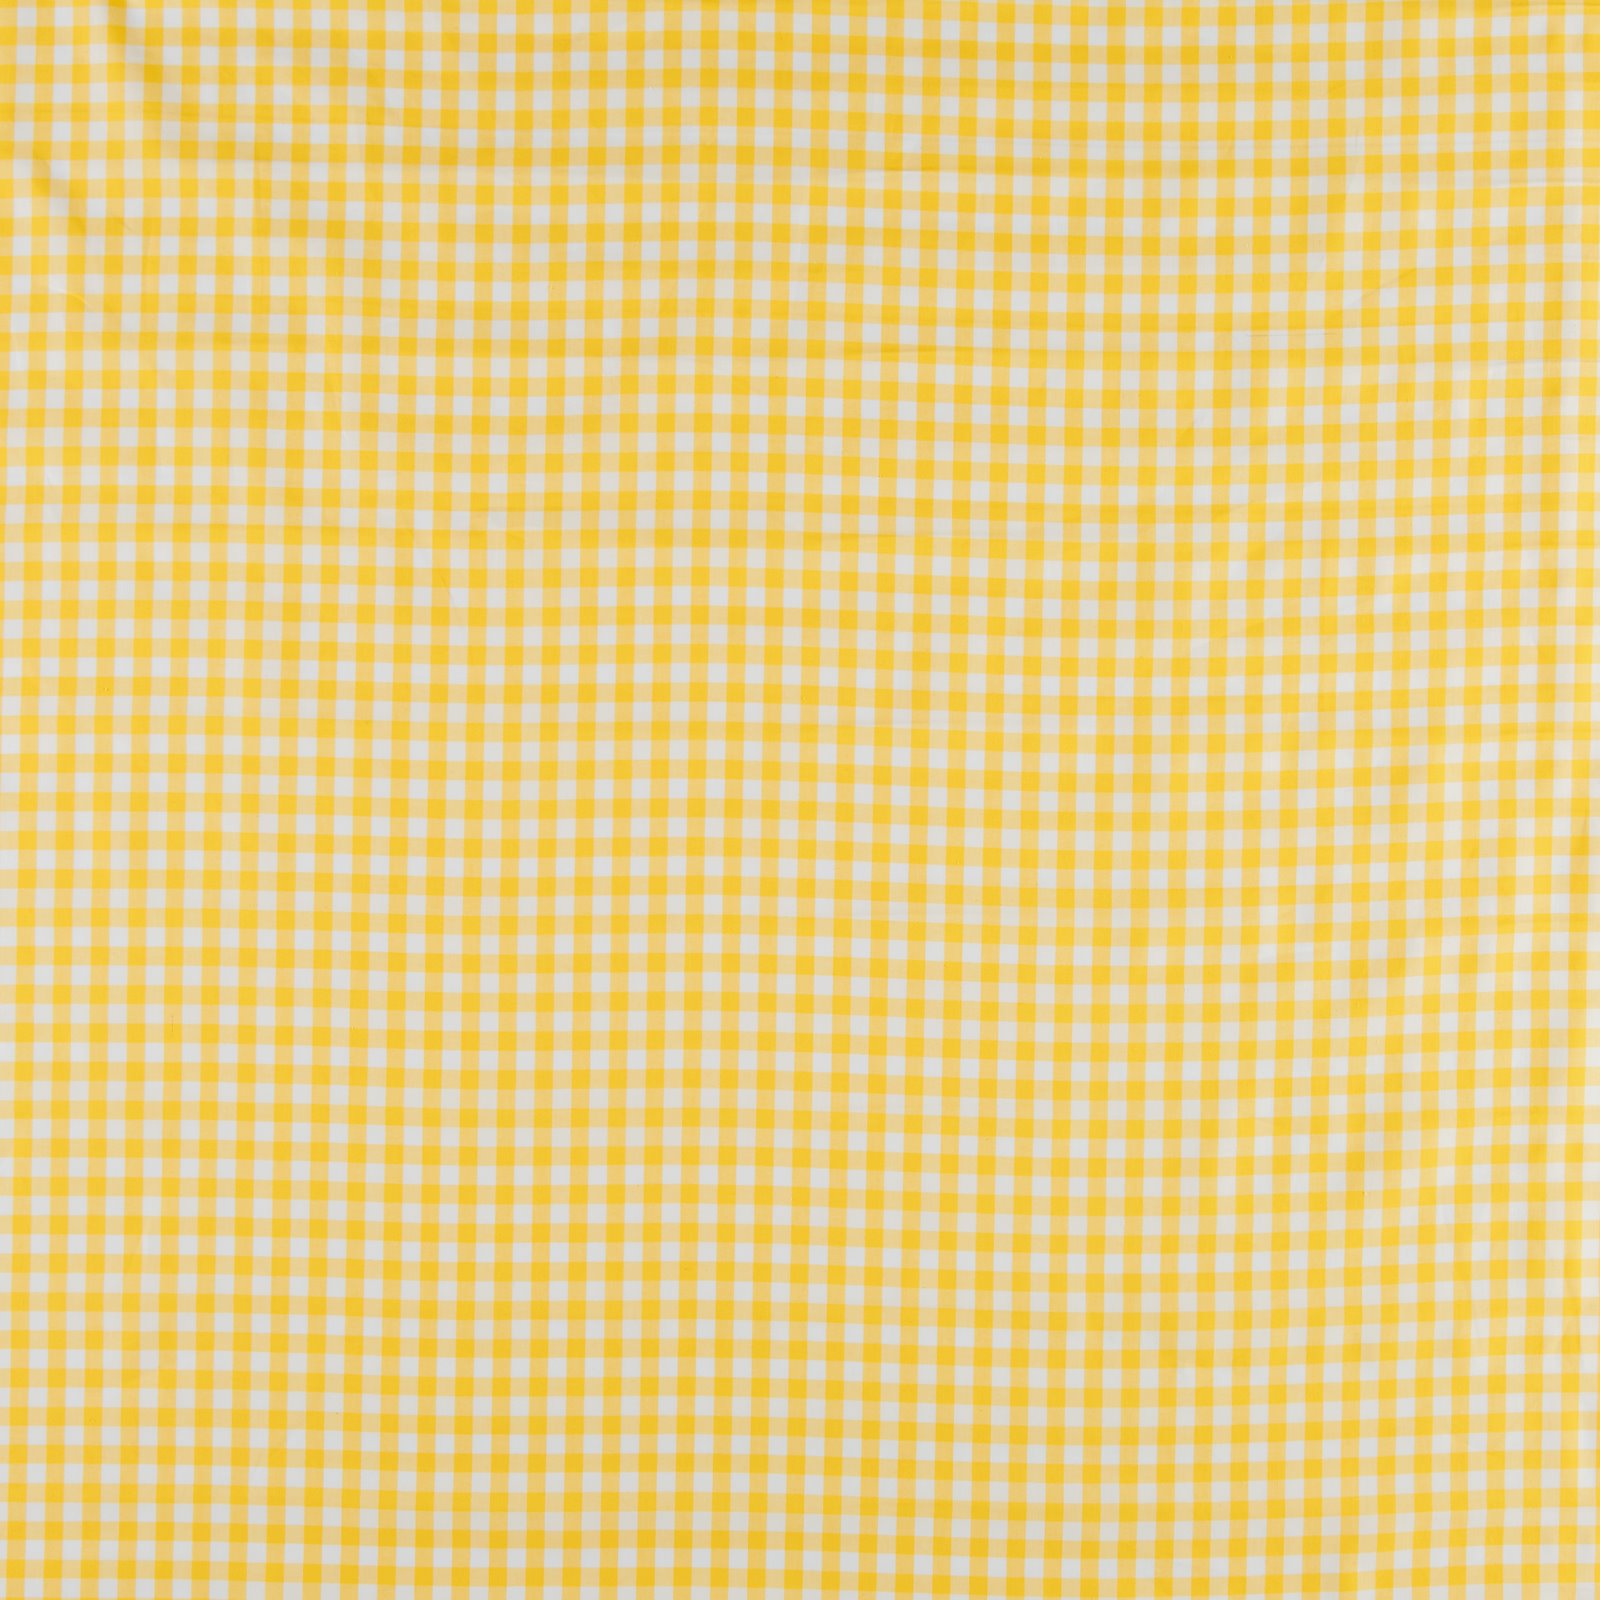 Cotton yarn dyed yellow/white check 780905_pack_sp